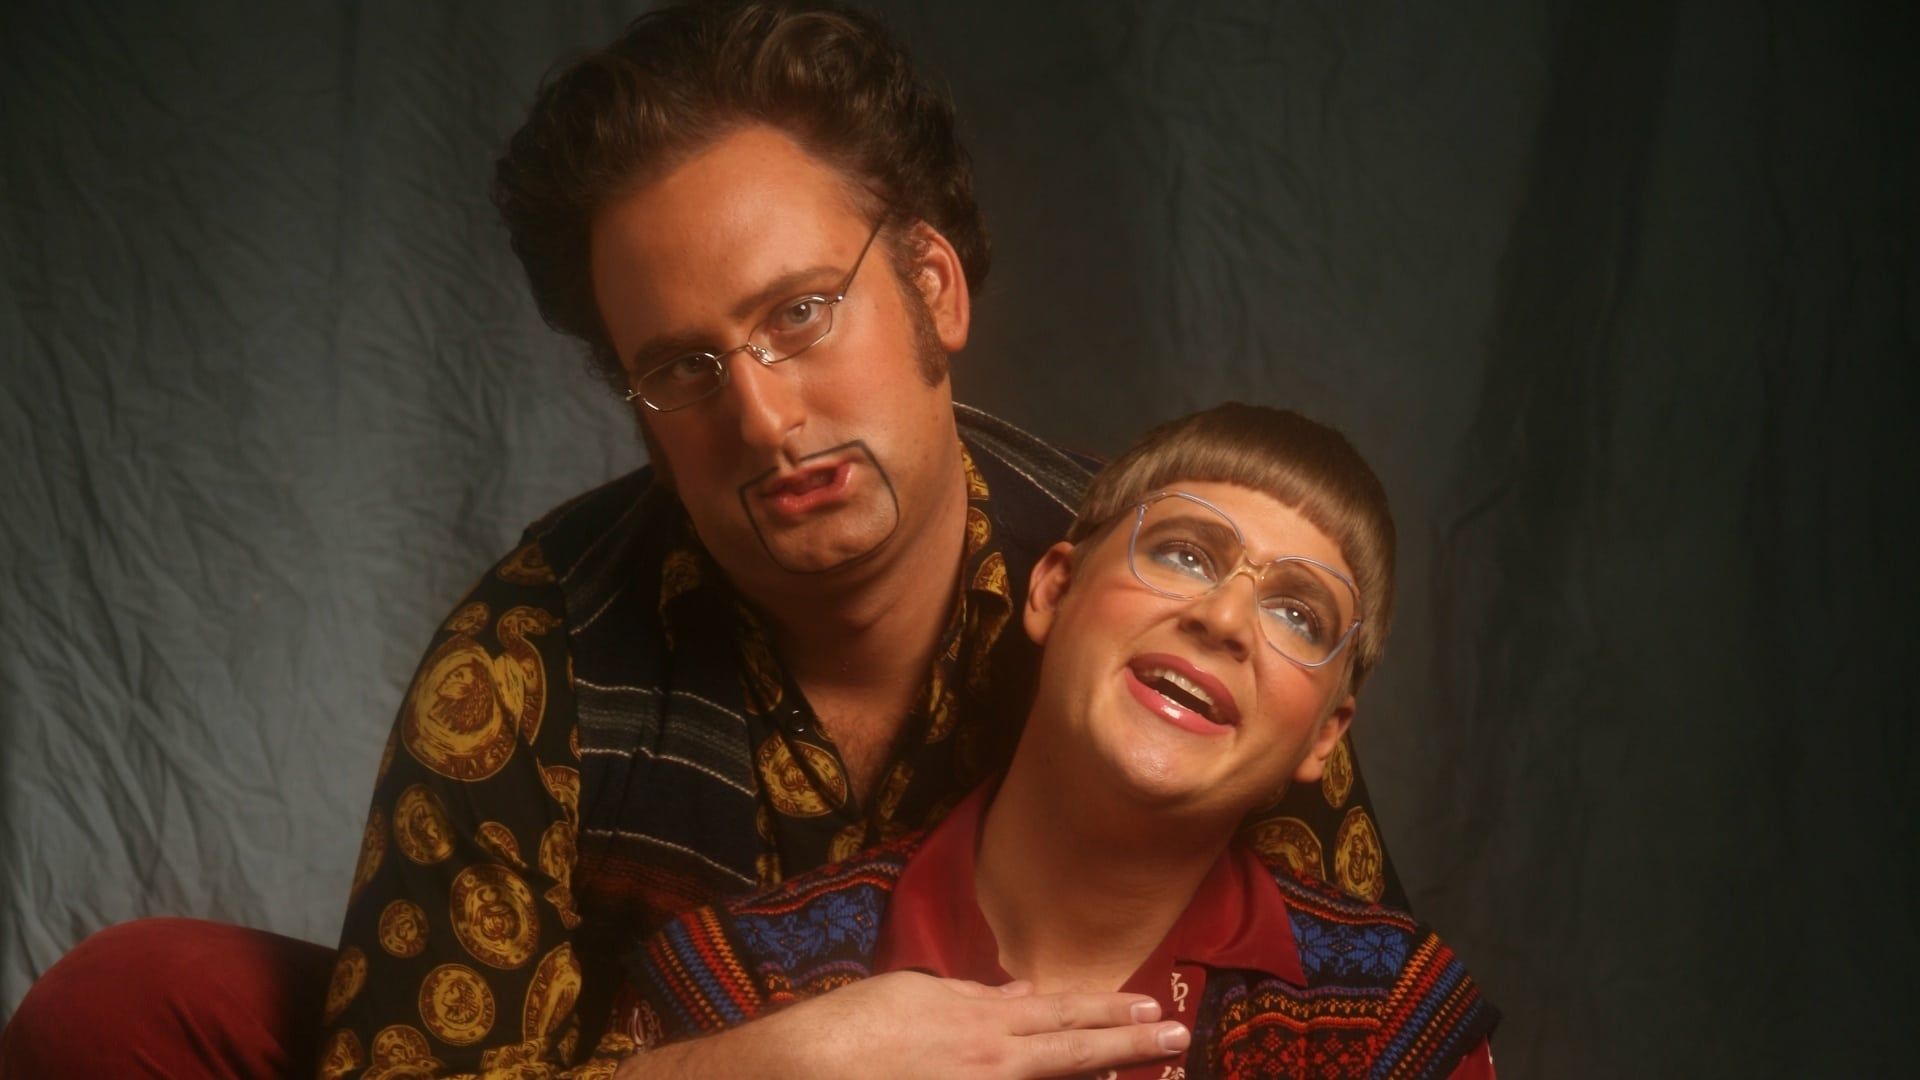 Cubierta de Tim and Eric Awesome Show, Great Job!